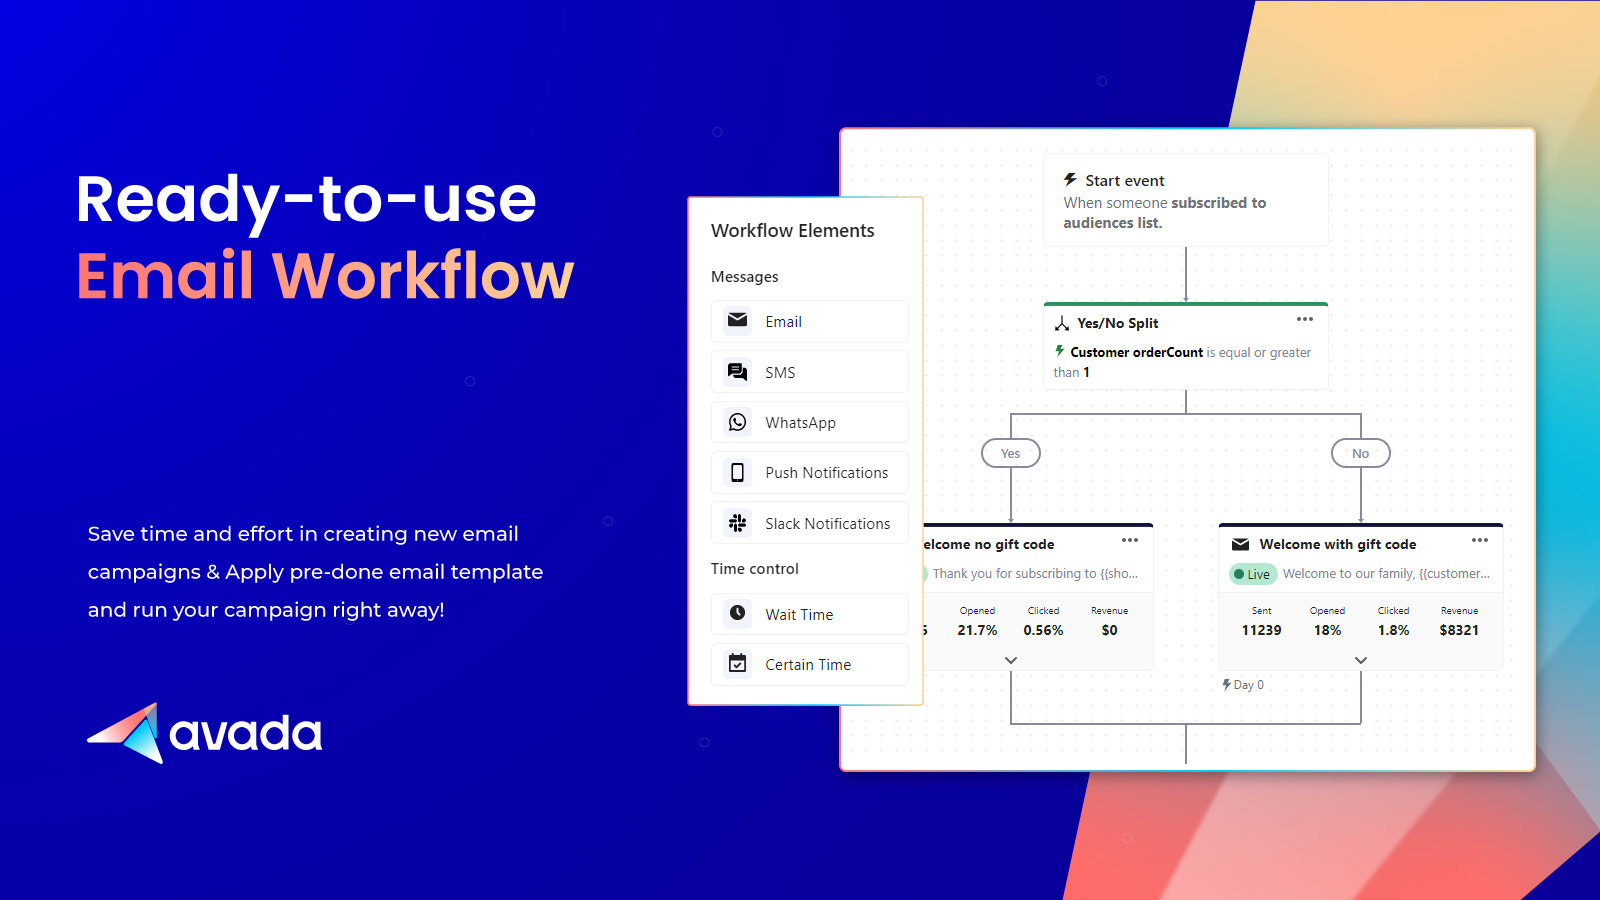 Automation workflows (Email, SMS, Web Push, WhatsApp)